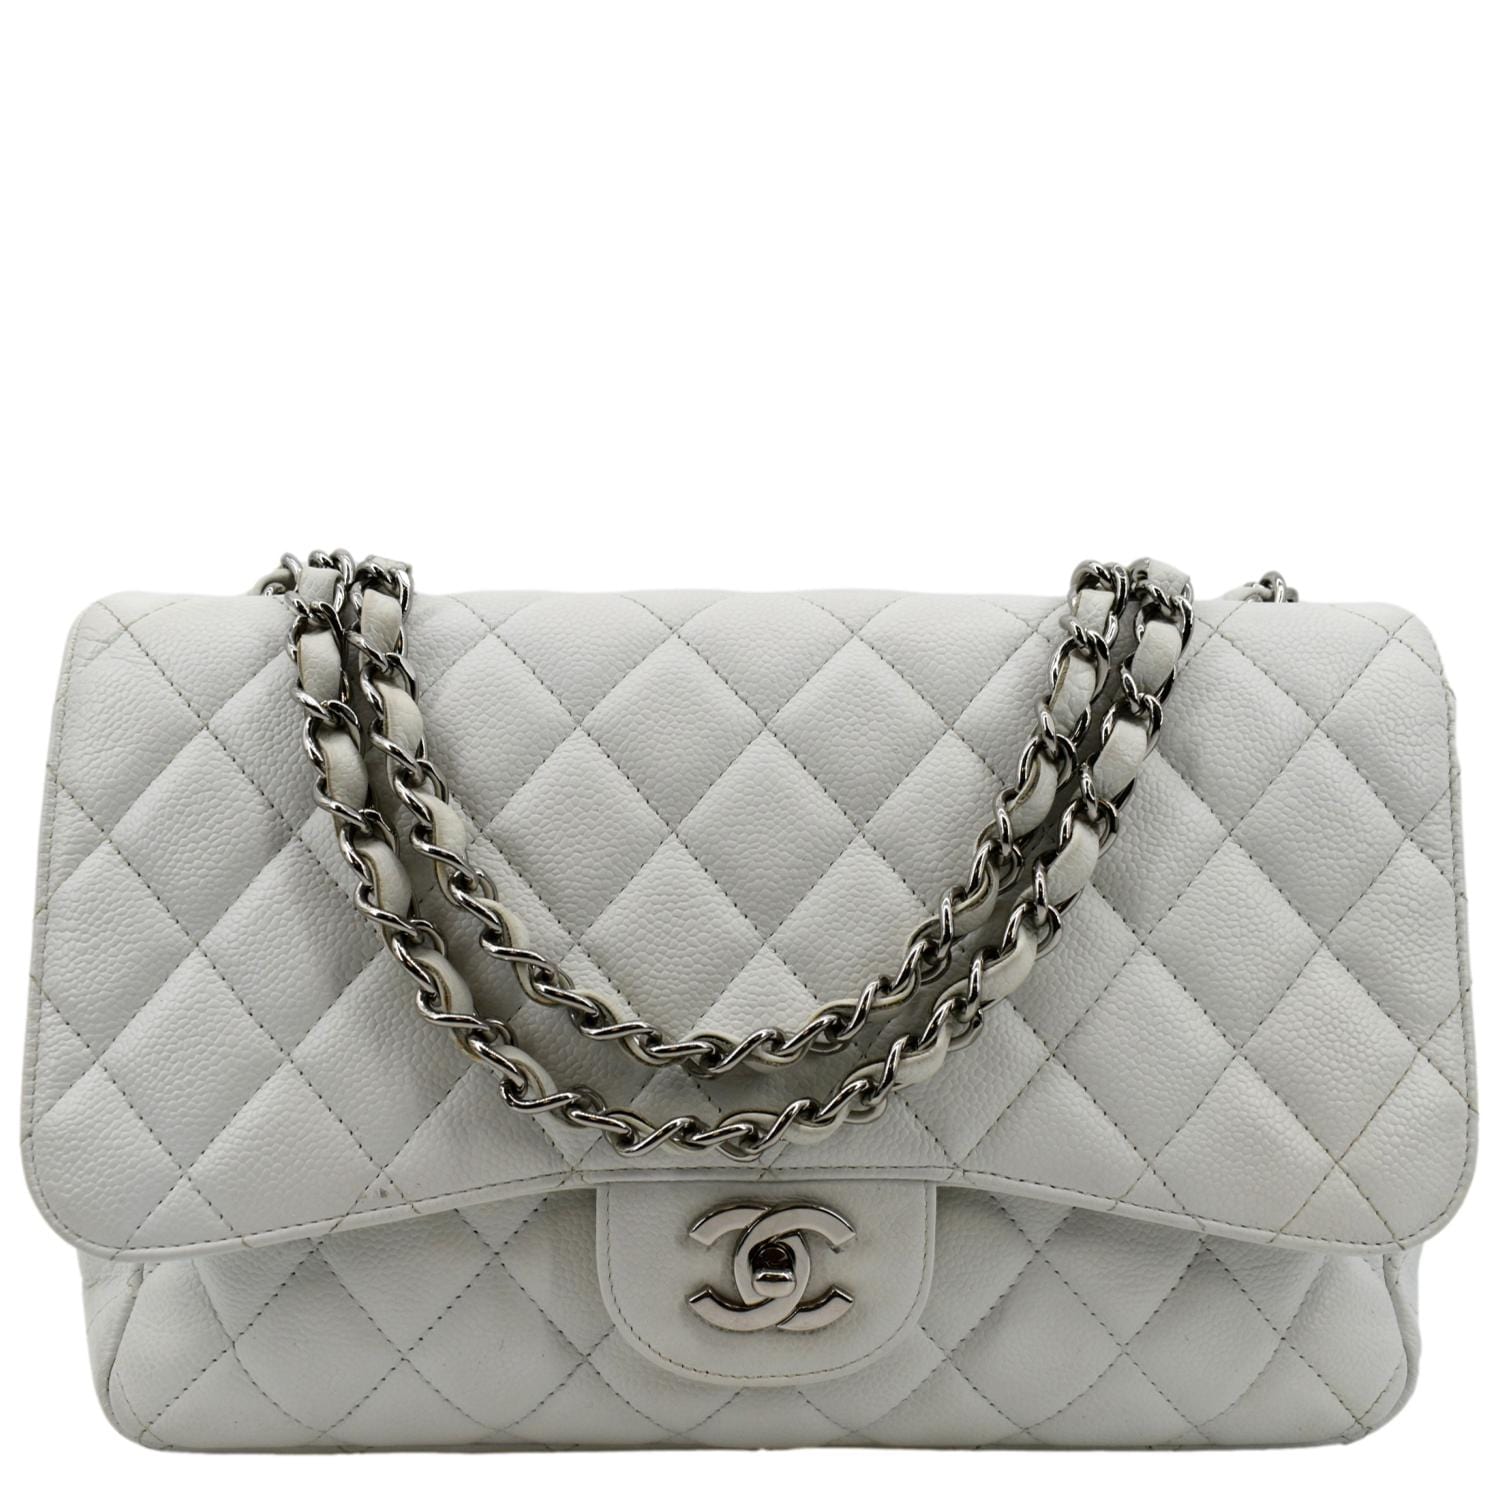 Chanel White Caviar Quilted Medium Classic Double Flap Bag